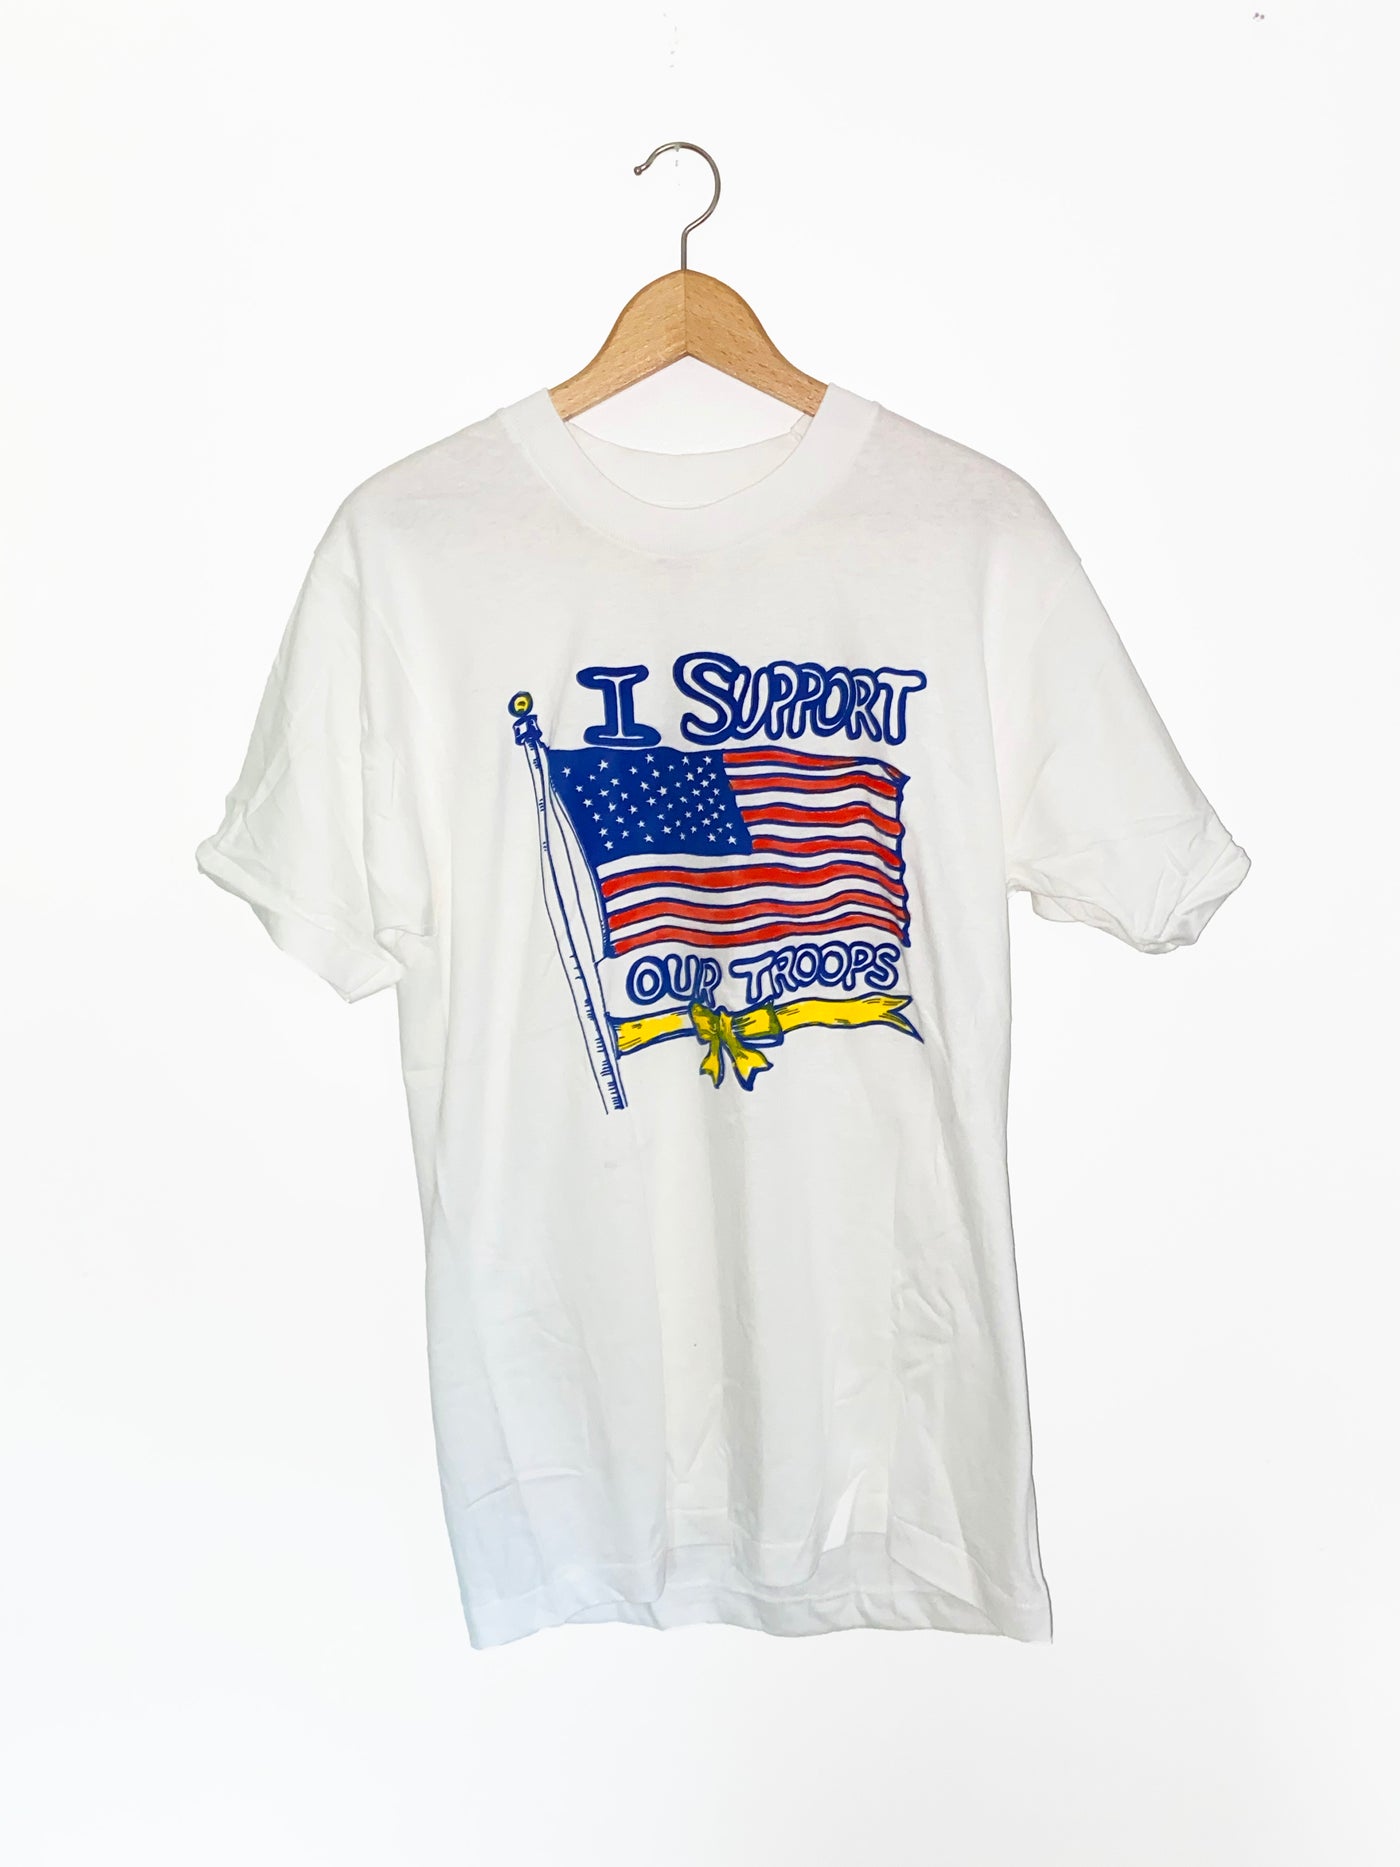 Vintage 90s 'I Support Our Troops' T-Shirt